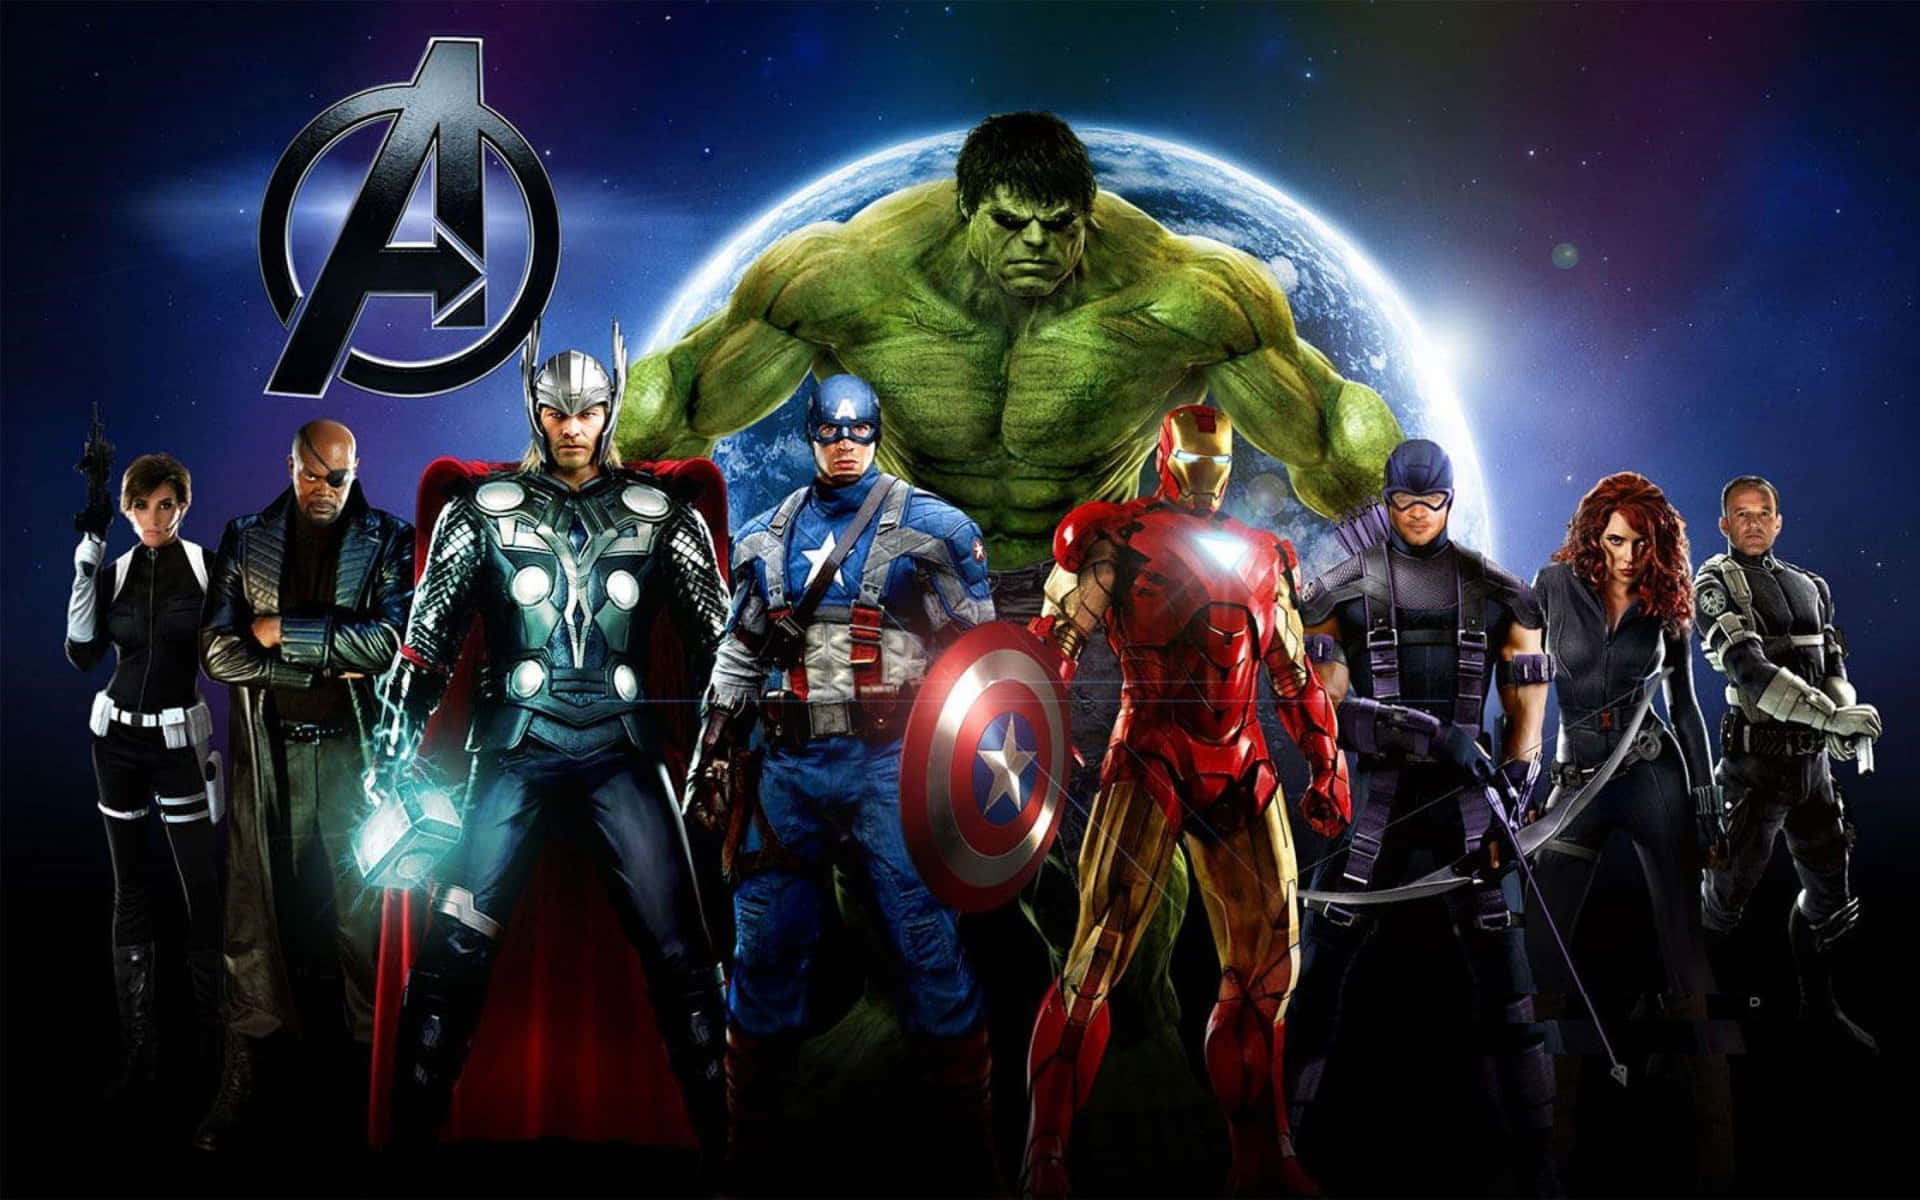 "Earth's Mightiest Heroes join forces to defeat evil" Wallpaper